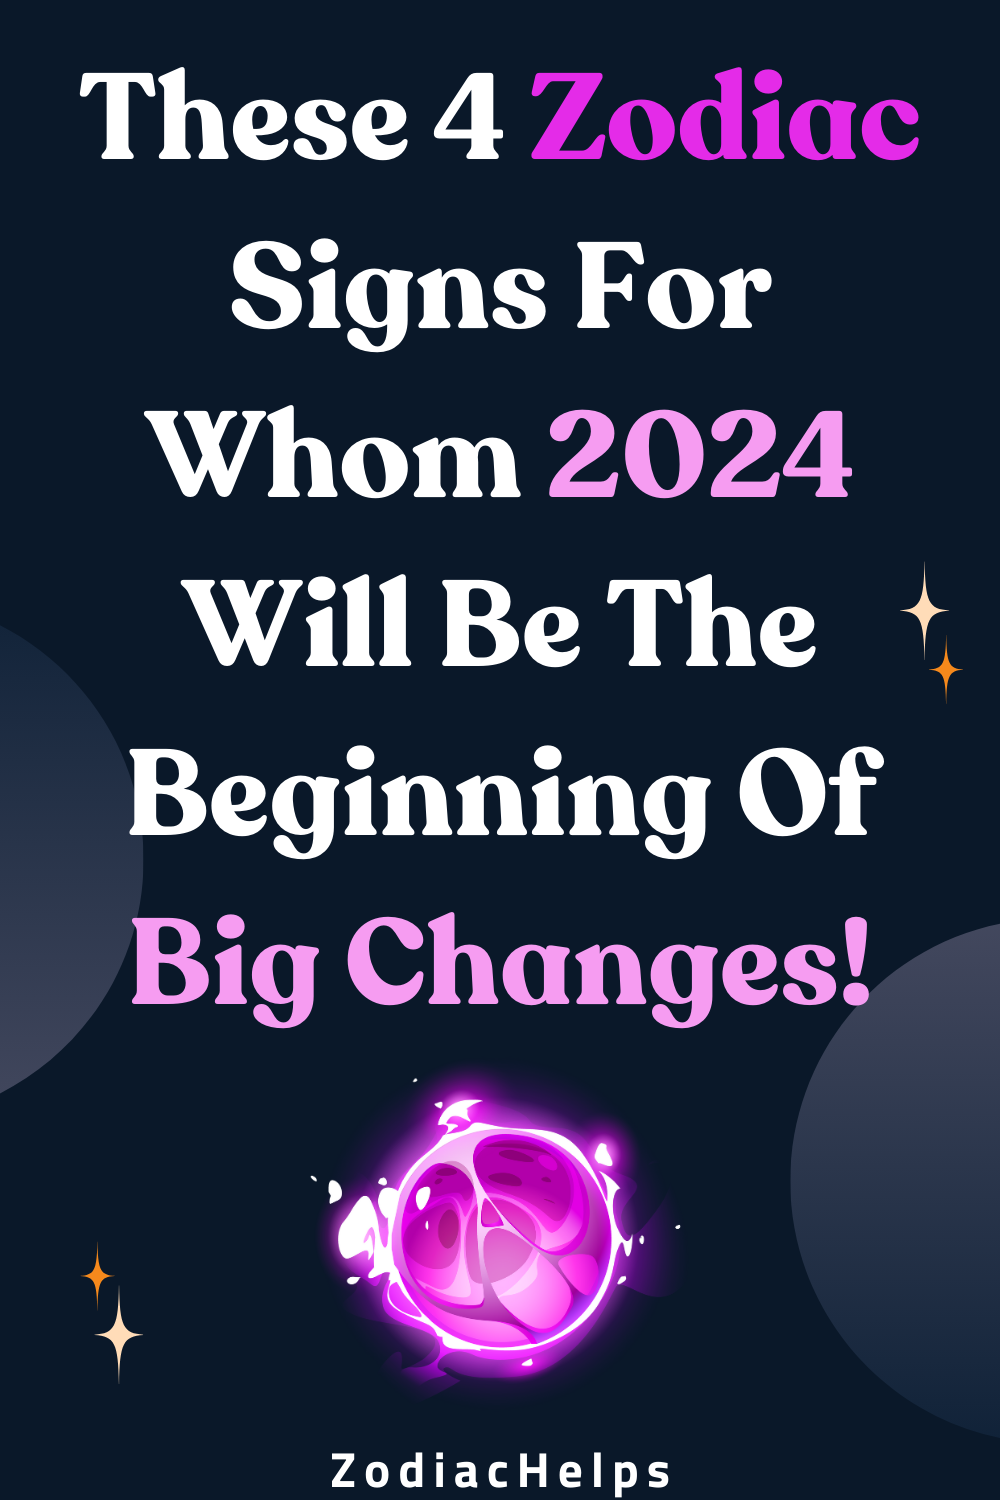 These 4 Zodiac Signs For Whom 2024 Will Be The Beginning Of Big Changes!